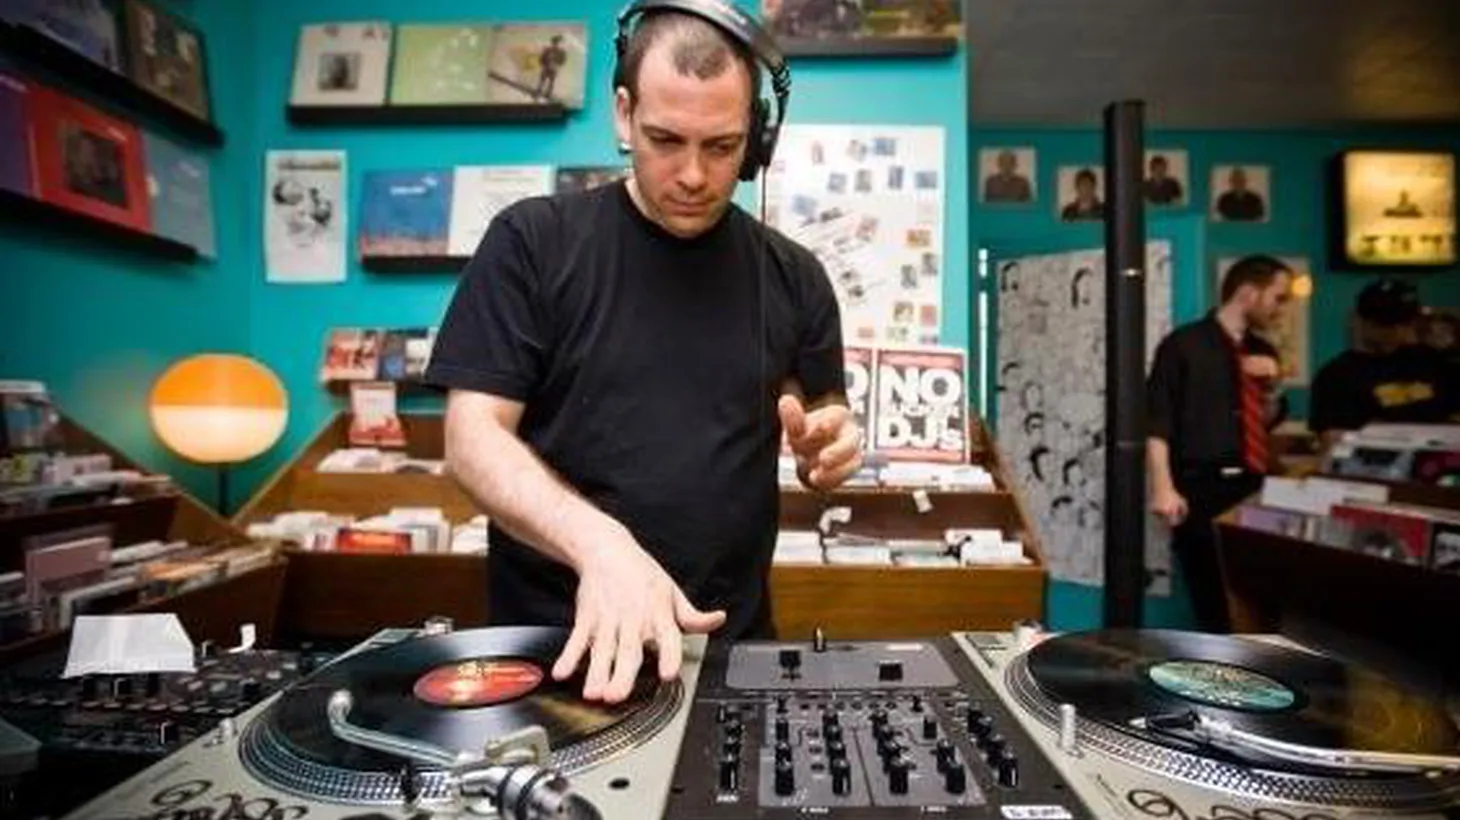 Esteemed deejay Z-Trip mans the turntables on Morning Becomes Eclectic at 11:15am.